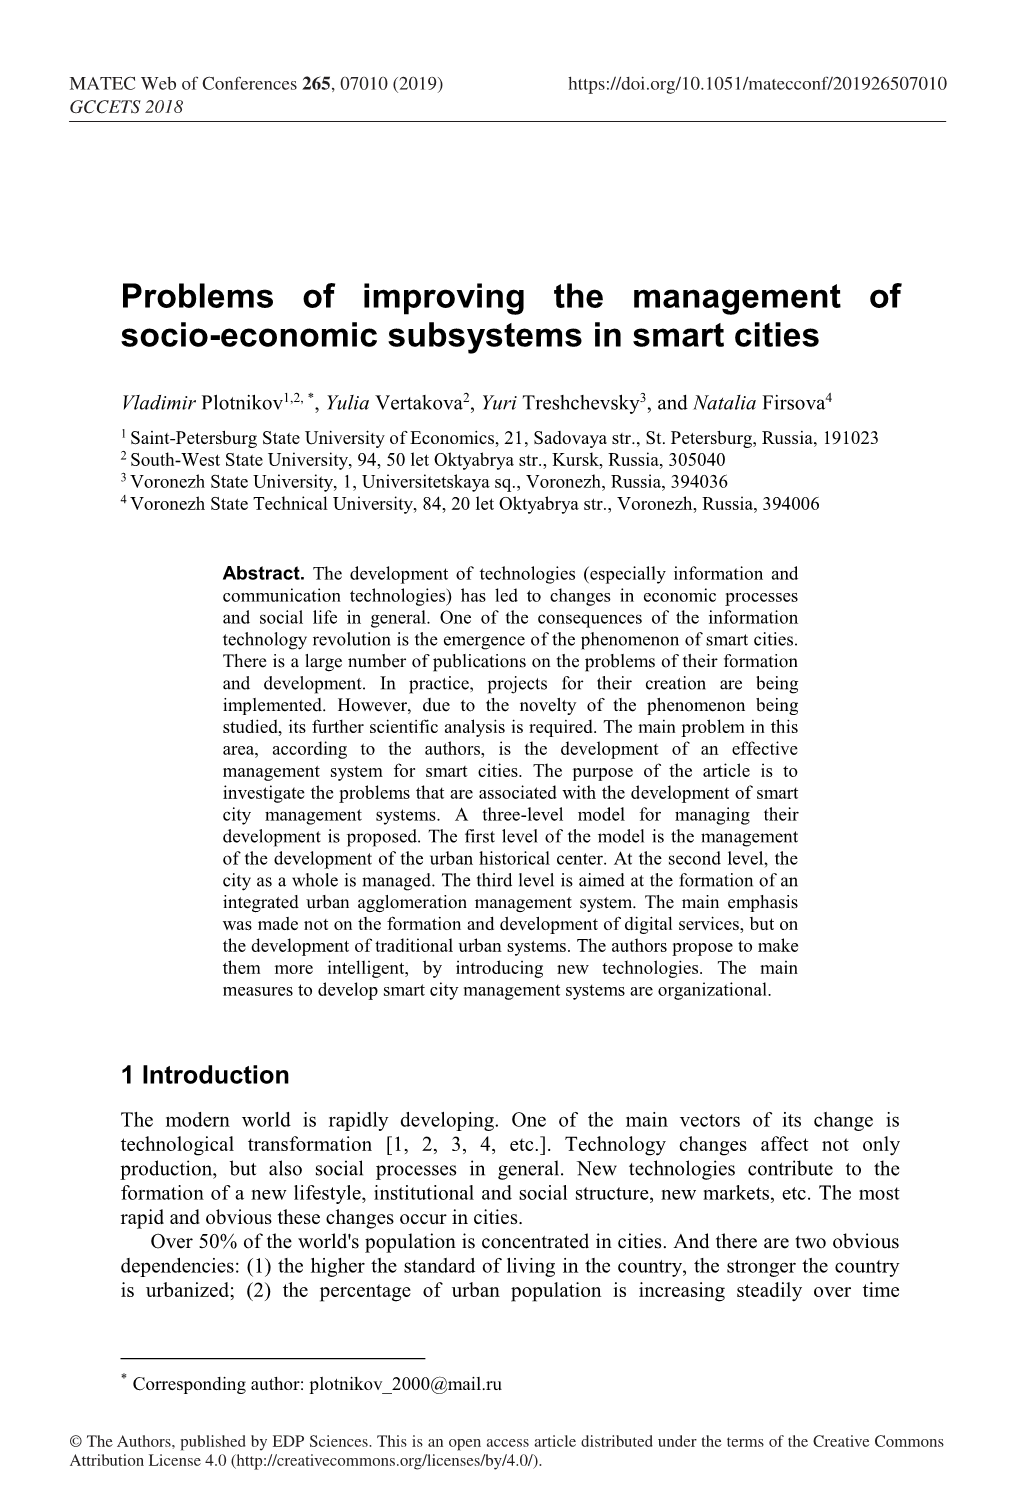 Problems of Improving the Management of Socio-Economic Subsystems in Smart Cities